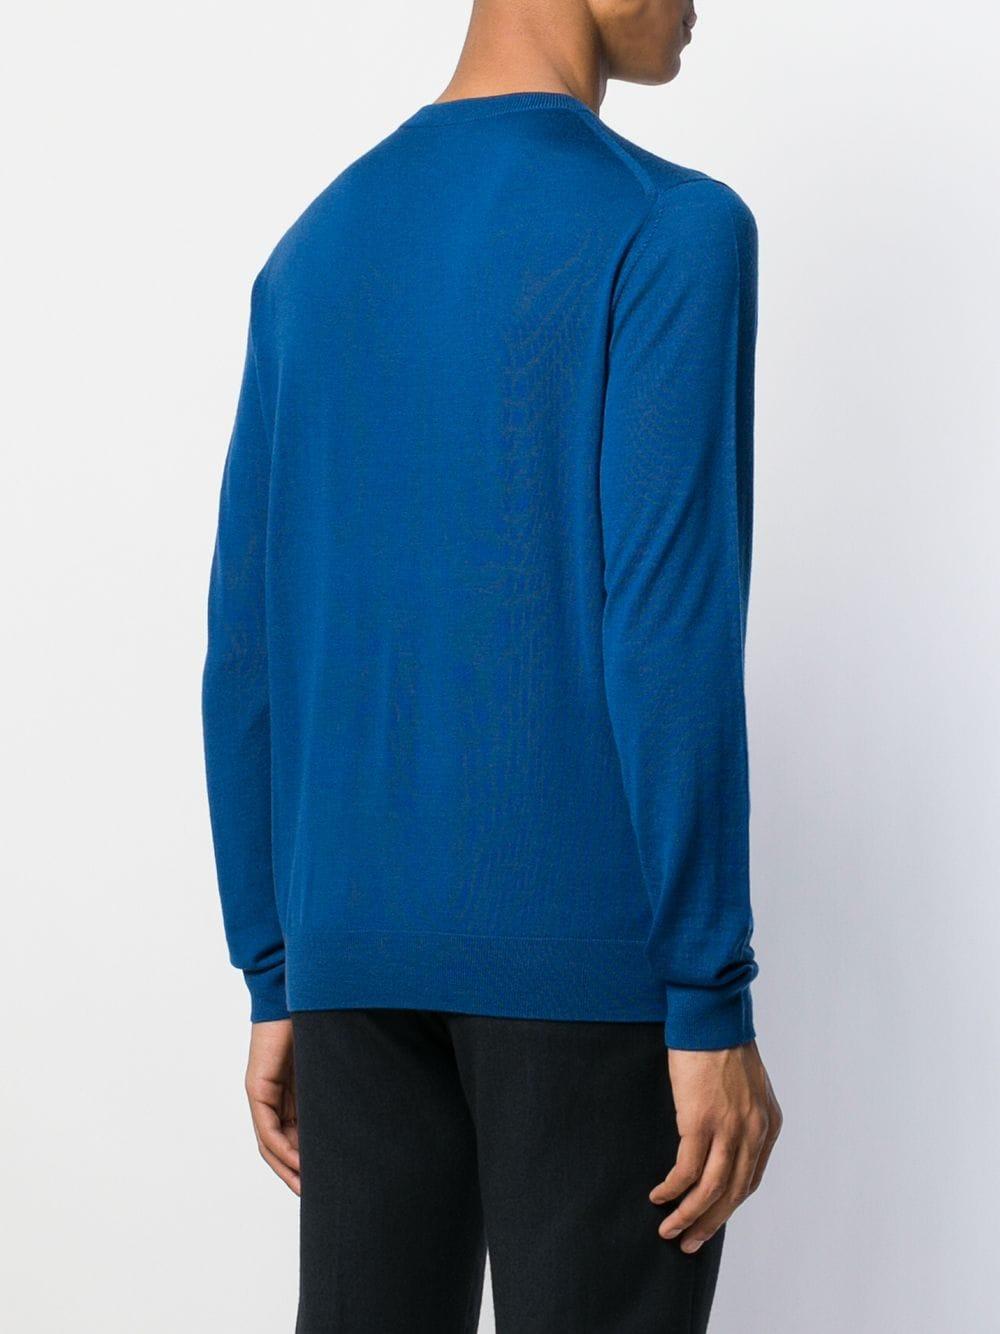 Paul Smith Wool V-neck Sweater in Blue for Men - Lyst